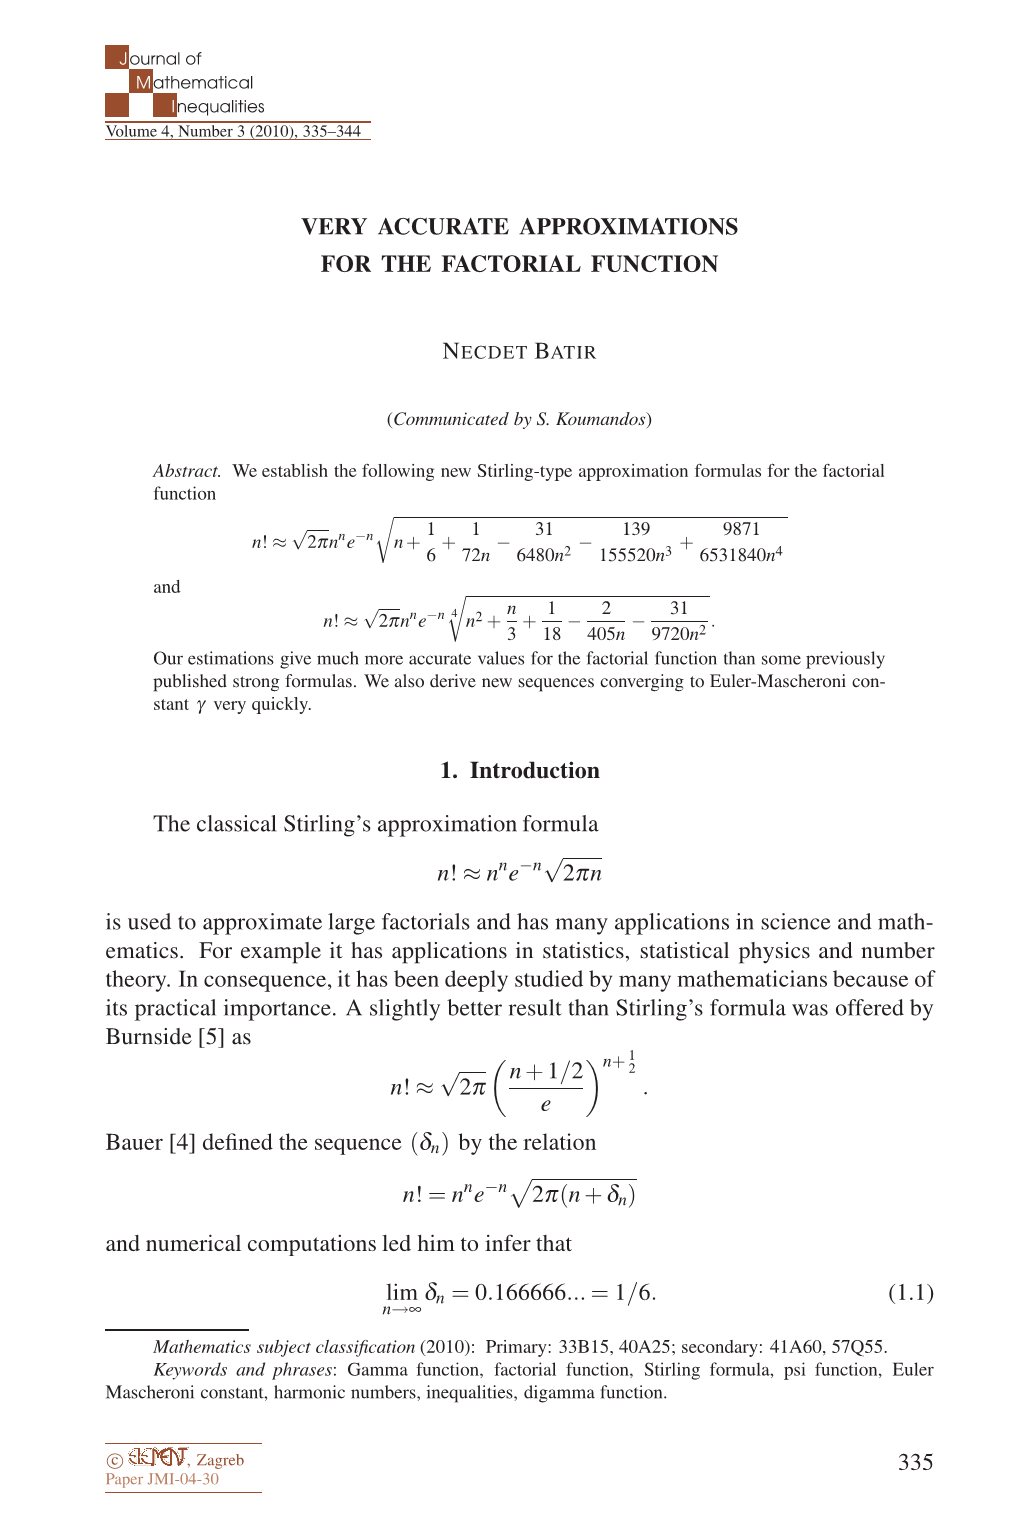 Very Accurate Approximations for the Factorial Function Necdet Batir